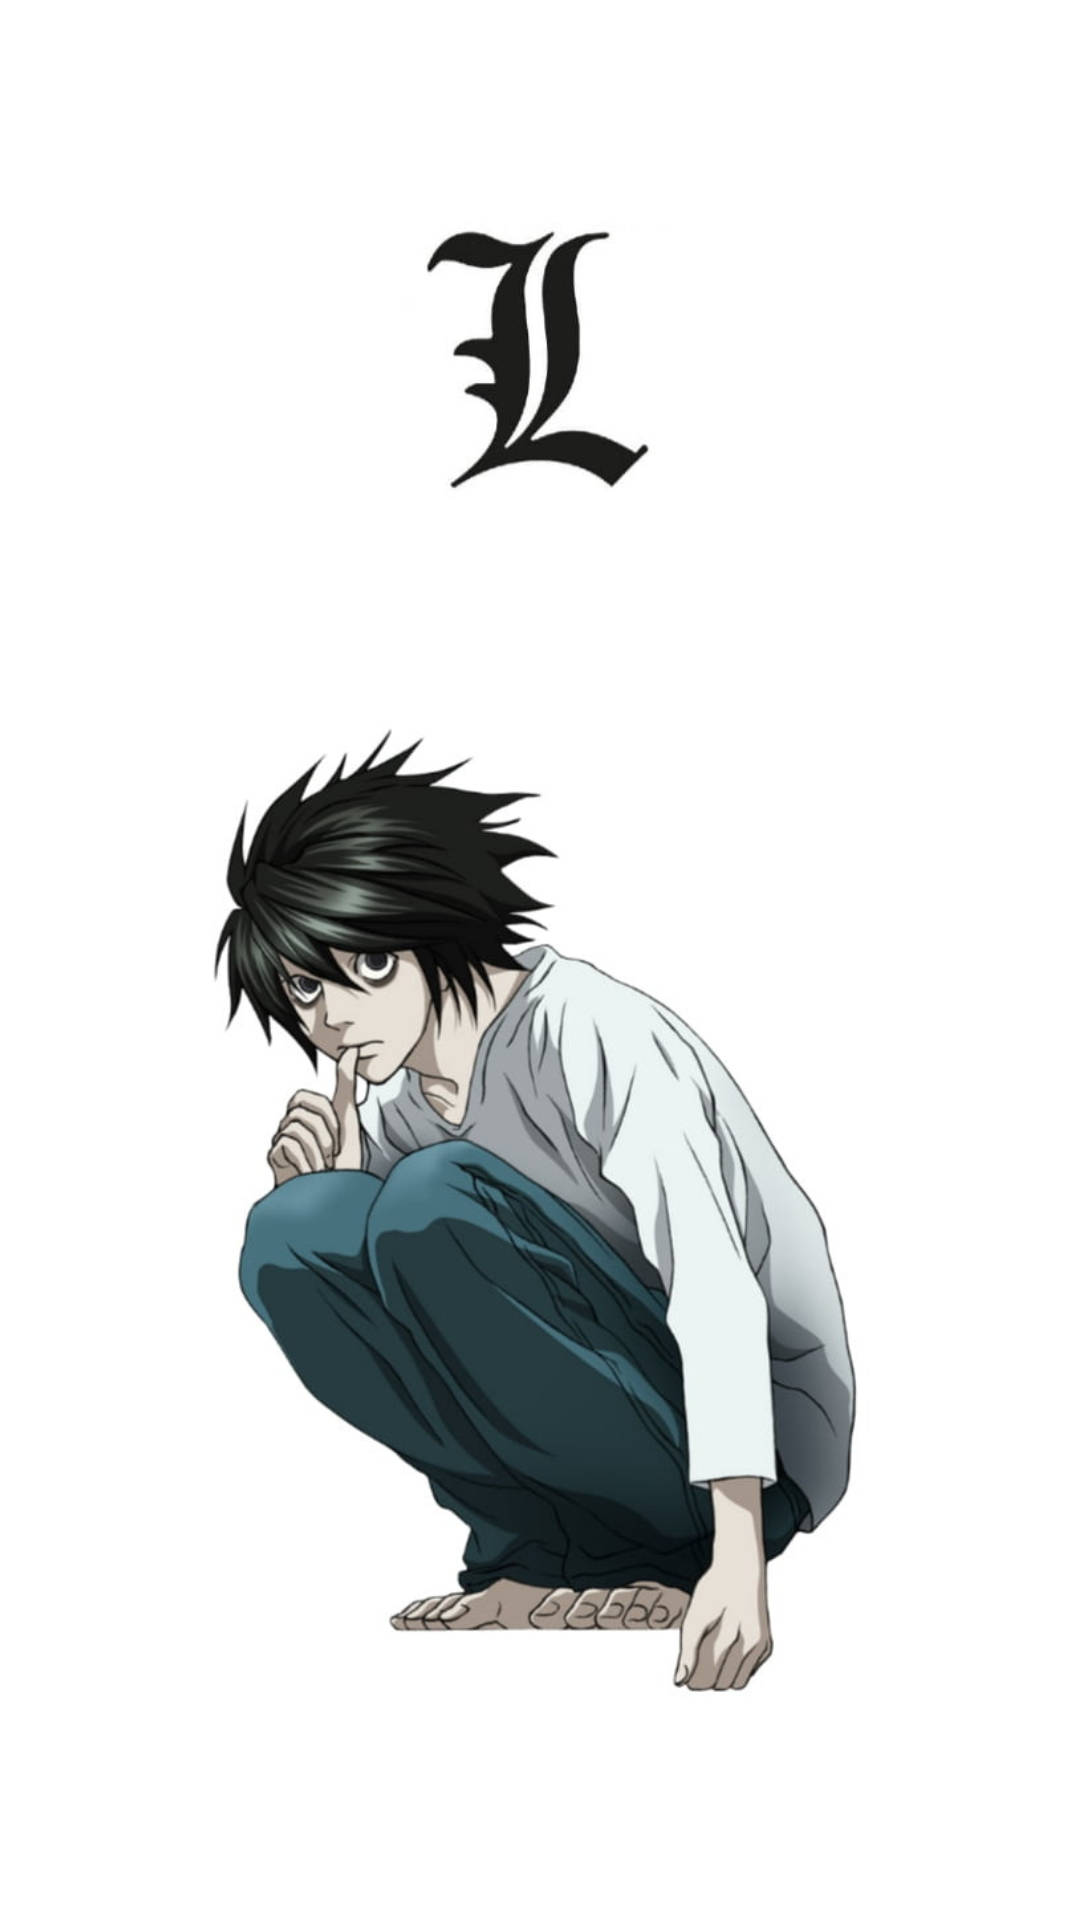 Lawliet Sitting Death Note Phone Wallpaper